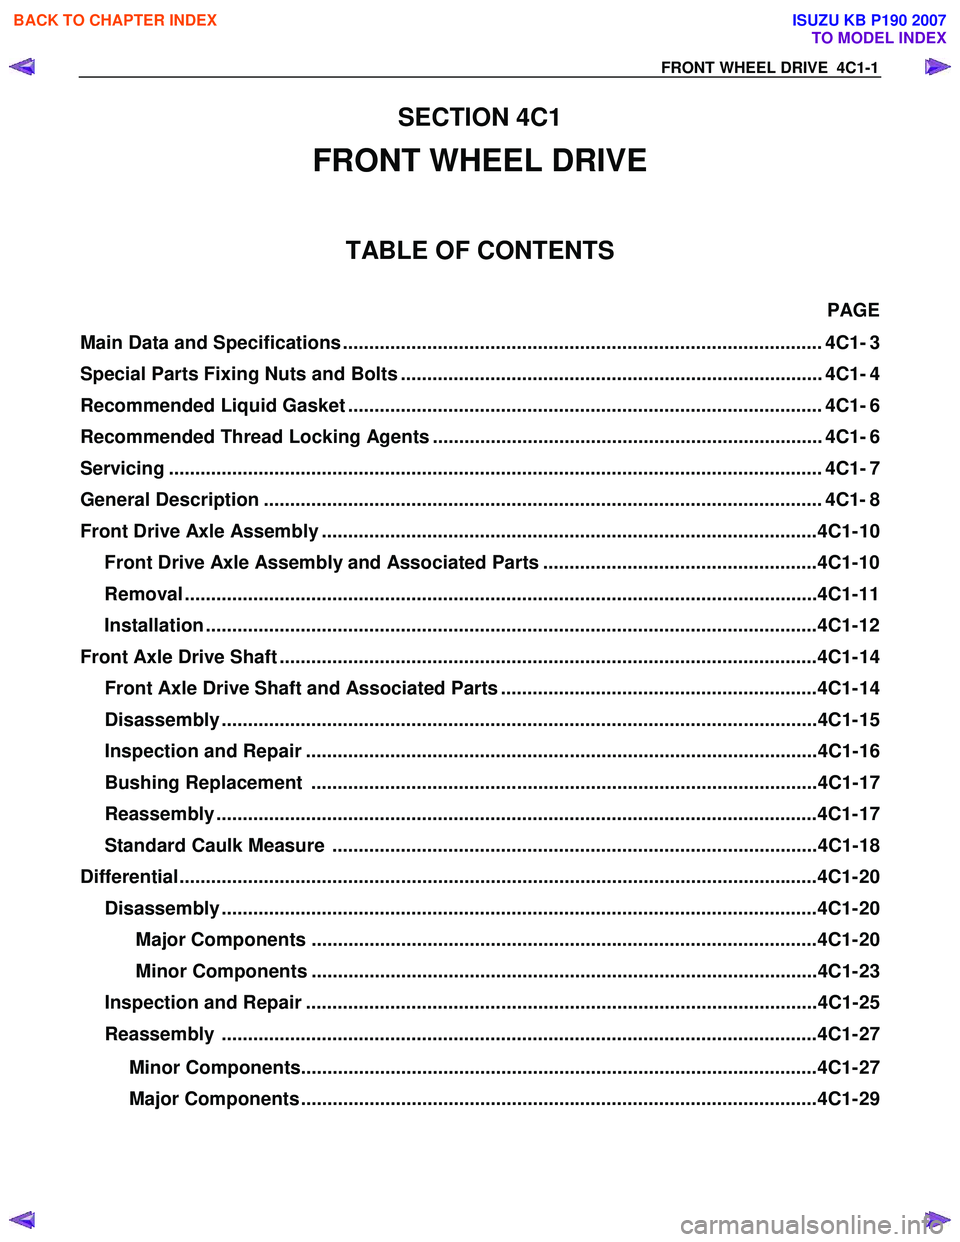 ISUZU KB P190 2007  Workshop User Guide FRONT WHEEL DRIVE  4C1-1 
SECTION 4C1 
FRONT WHEEL DRIVE 
TABLE OF CONTENTS 
 PAGE 
Main Data and Specifications .......................................................................................